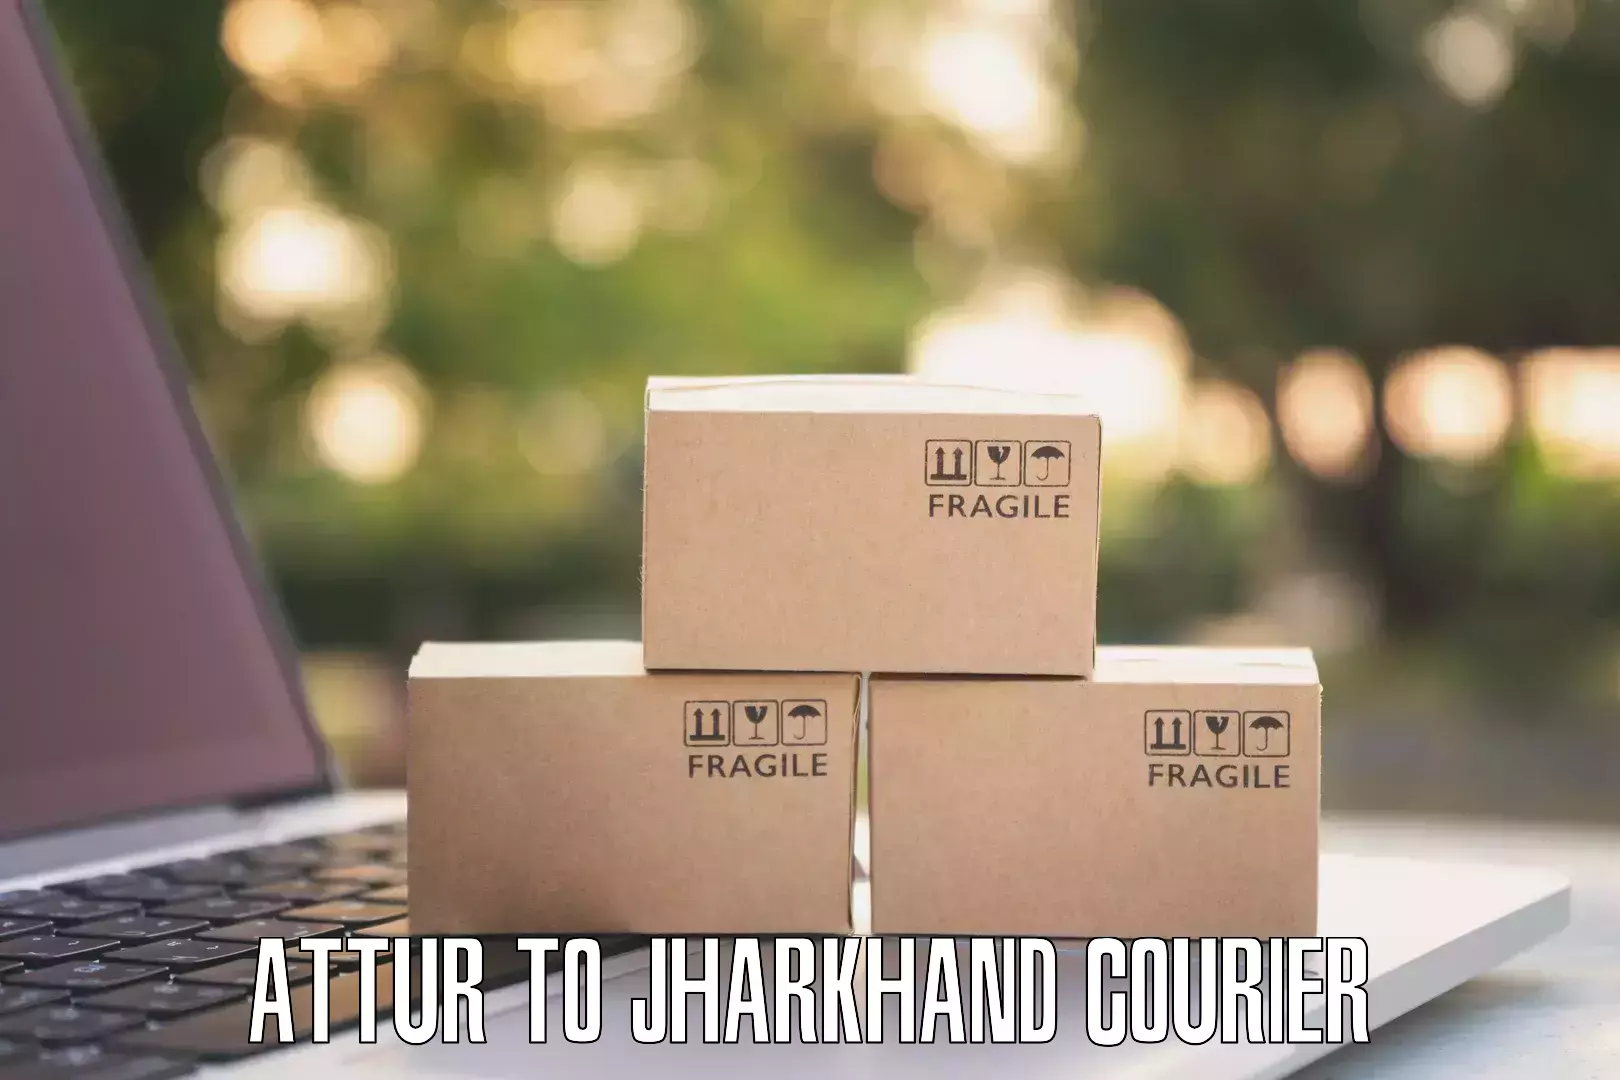 Bulk courier orders Attur to Chandil